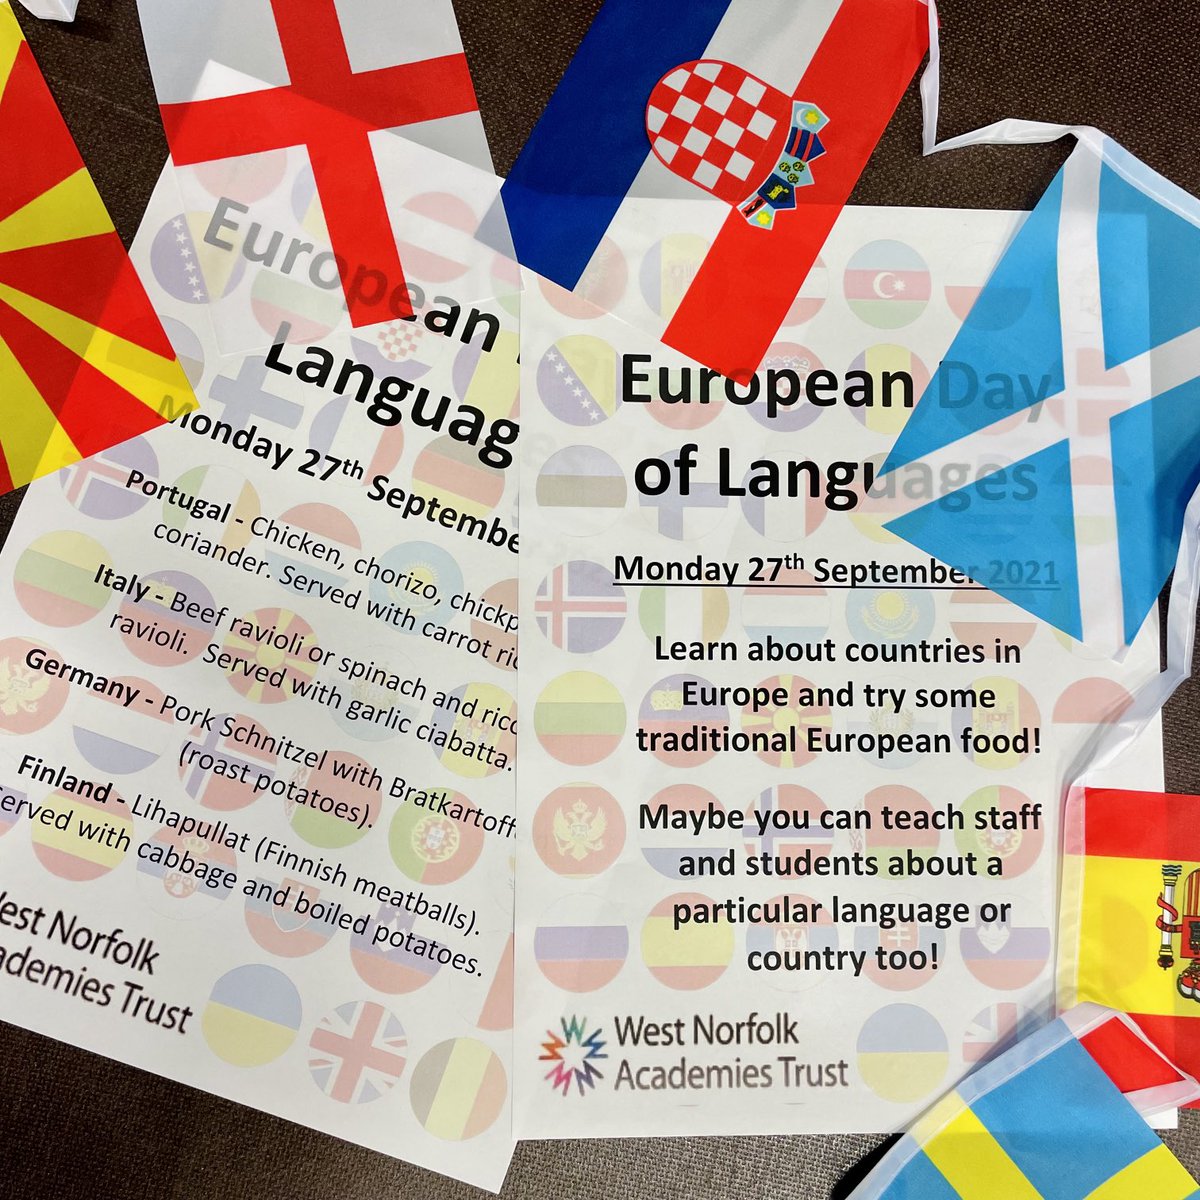 Looking forward to celebrating European Day of Languages. Lots planned for our students and staff 🌍 #ourworld #europeancuisine #culturaldiversity #languages #multilingualism #StCPRIDE